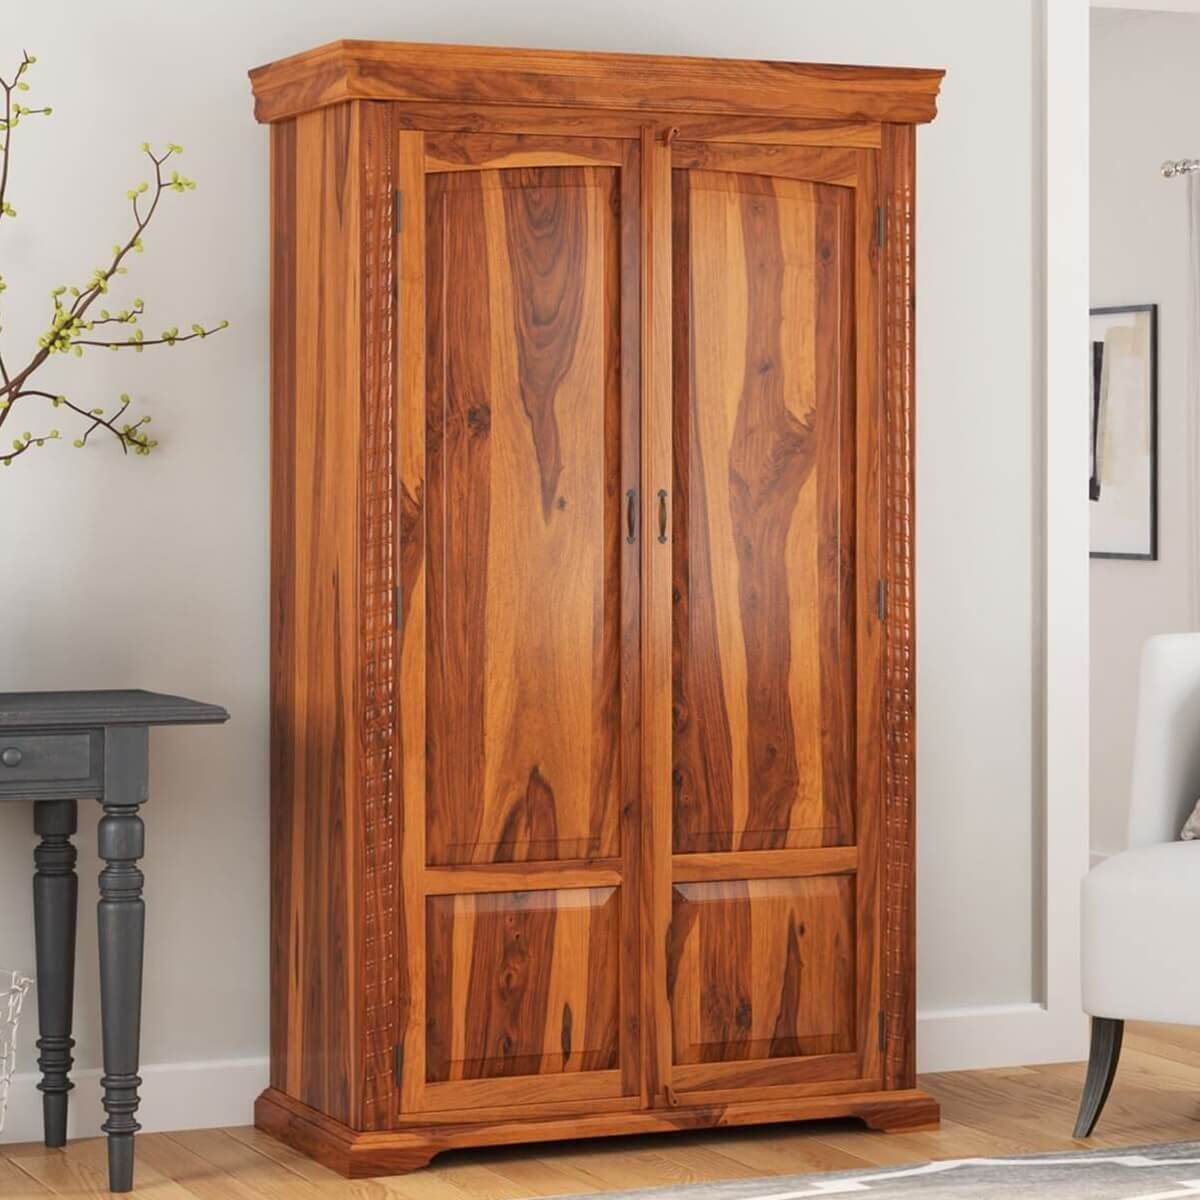 Empire Bedroom Transitional Solid Wood Large Armoire Wardrobe With Shelves Intended For Large Wooden Wardrobes (View 7 of 15)